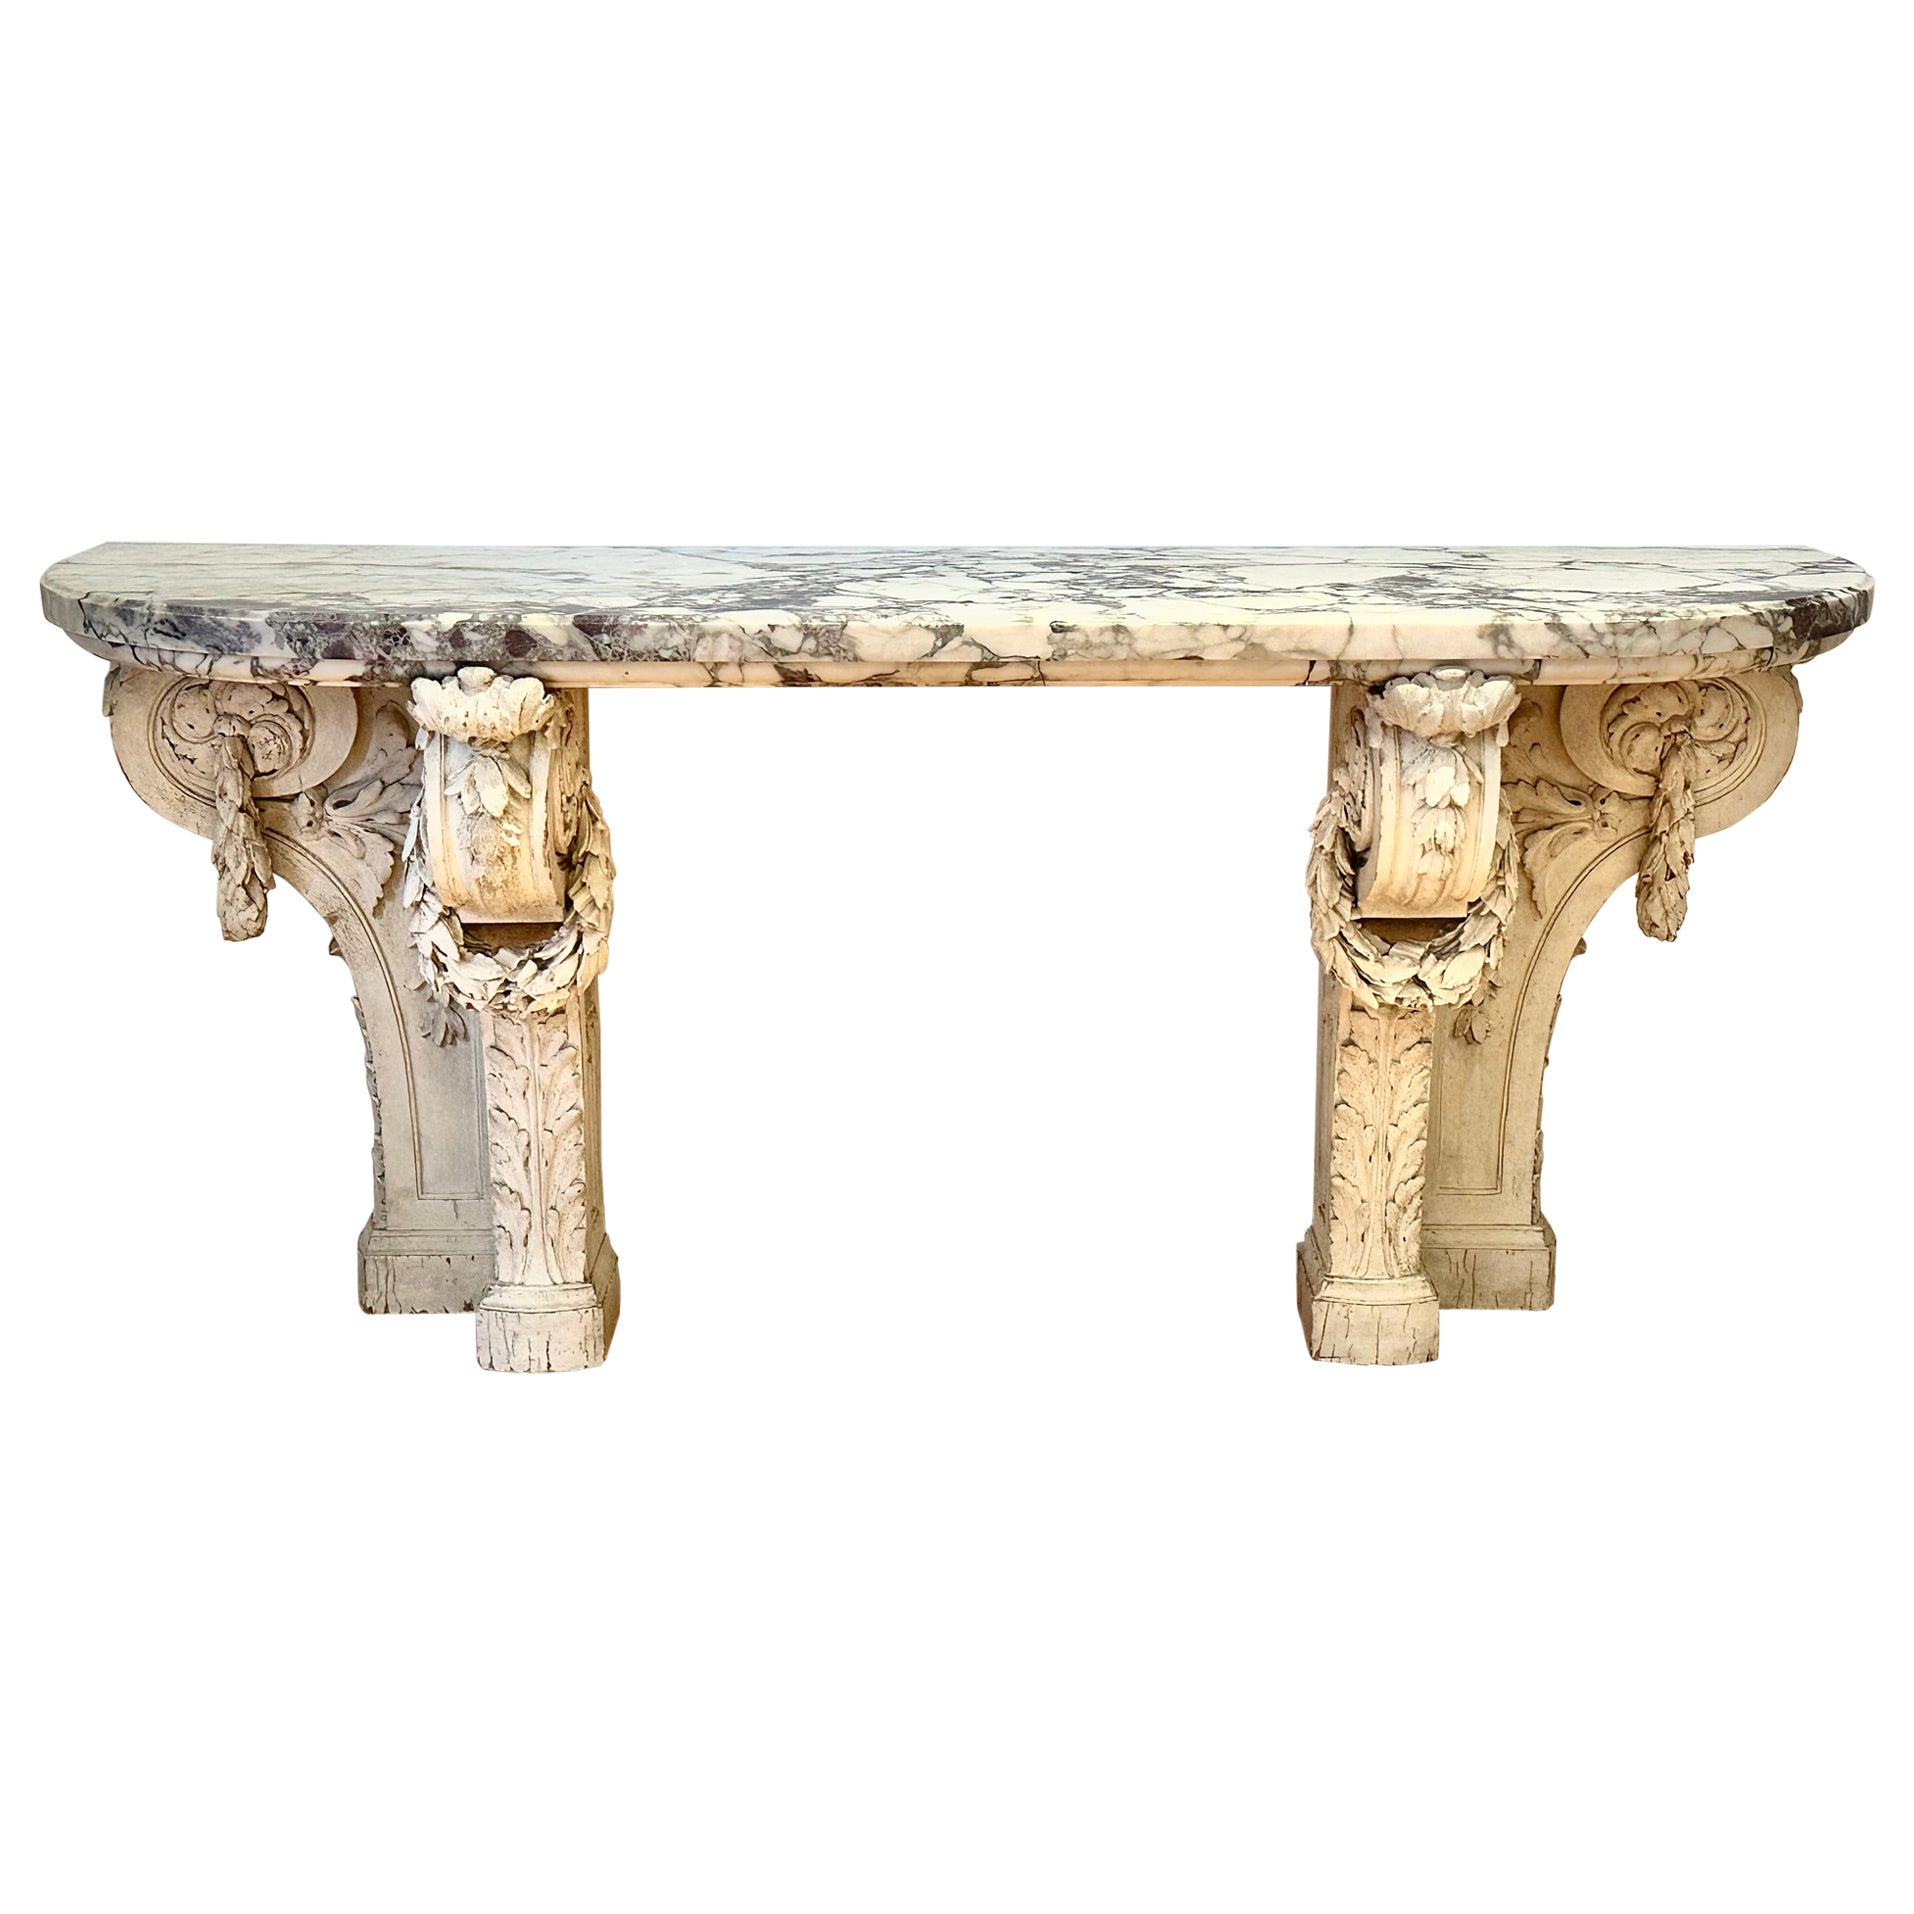 19th Century Neoclassical Marble and Carved Wood Console Table For Sale